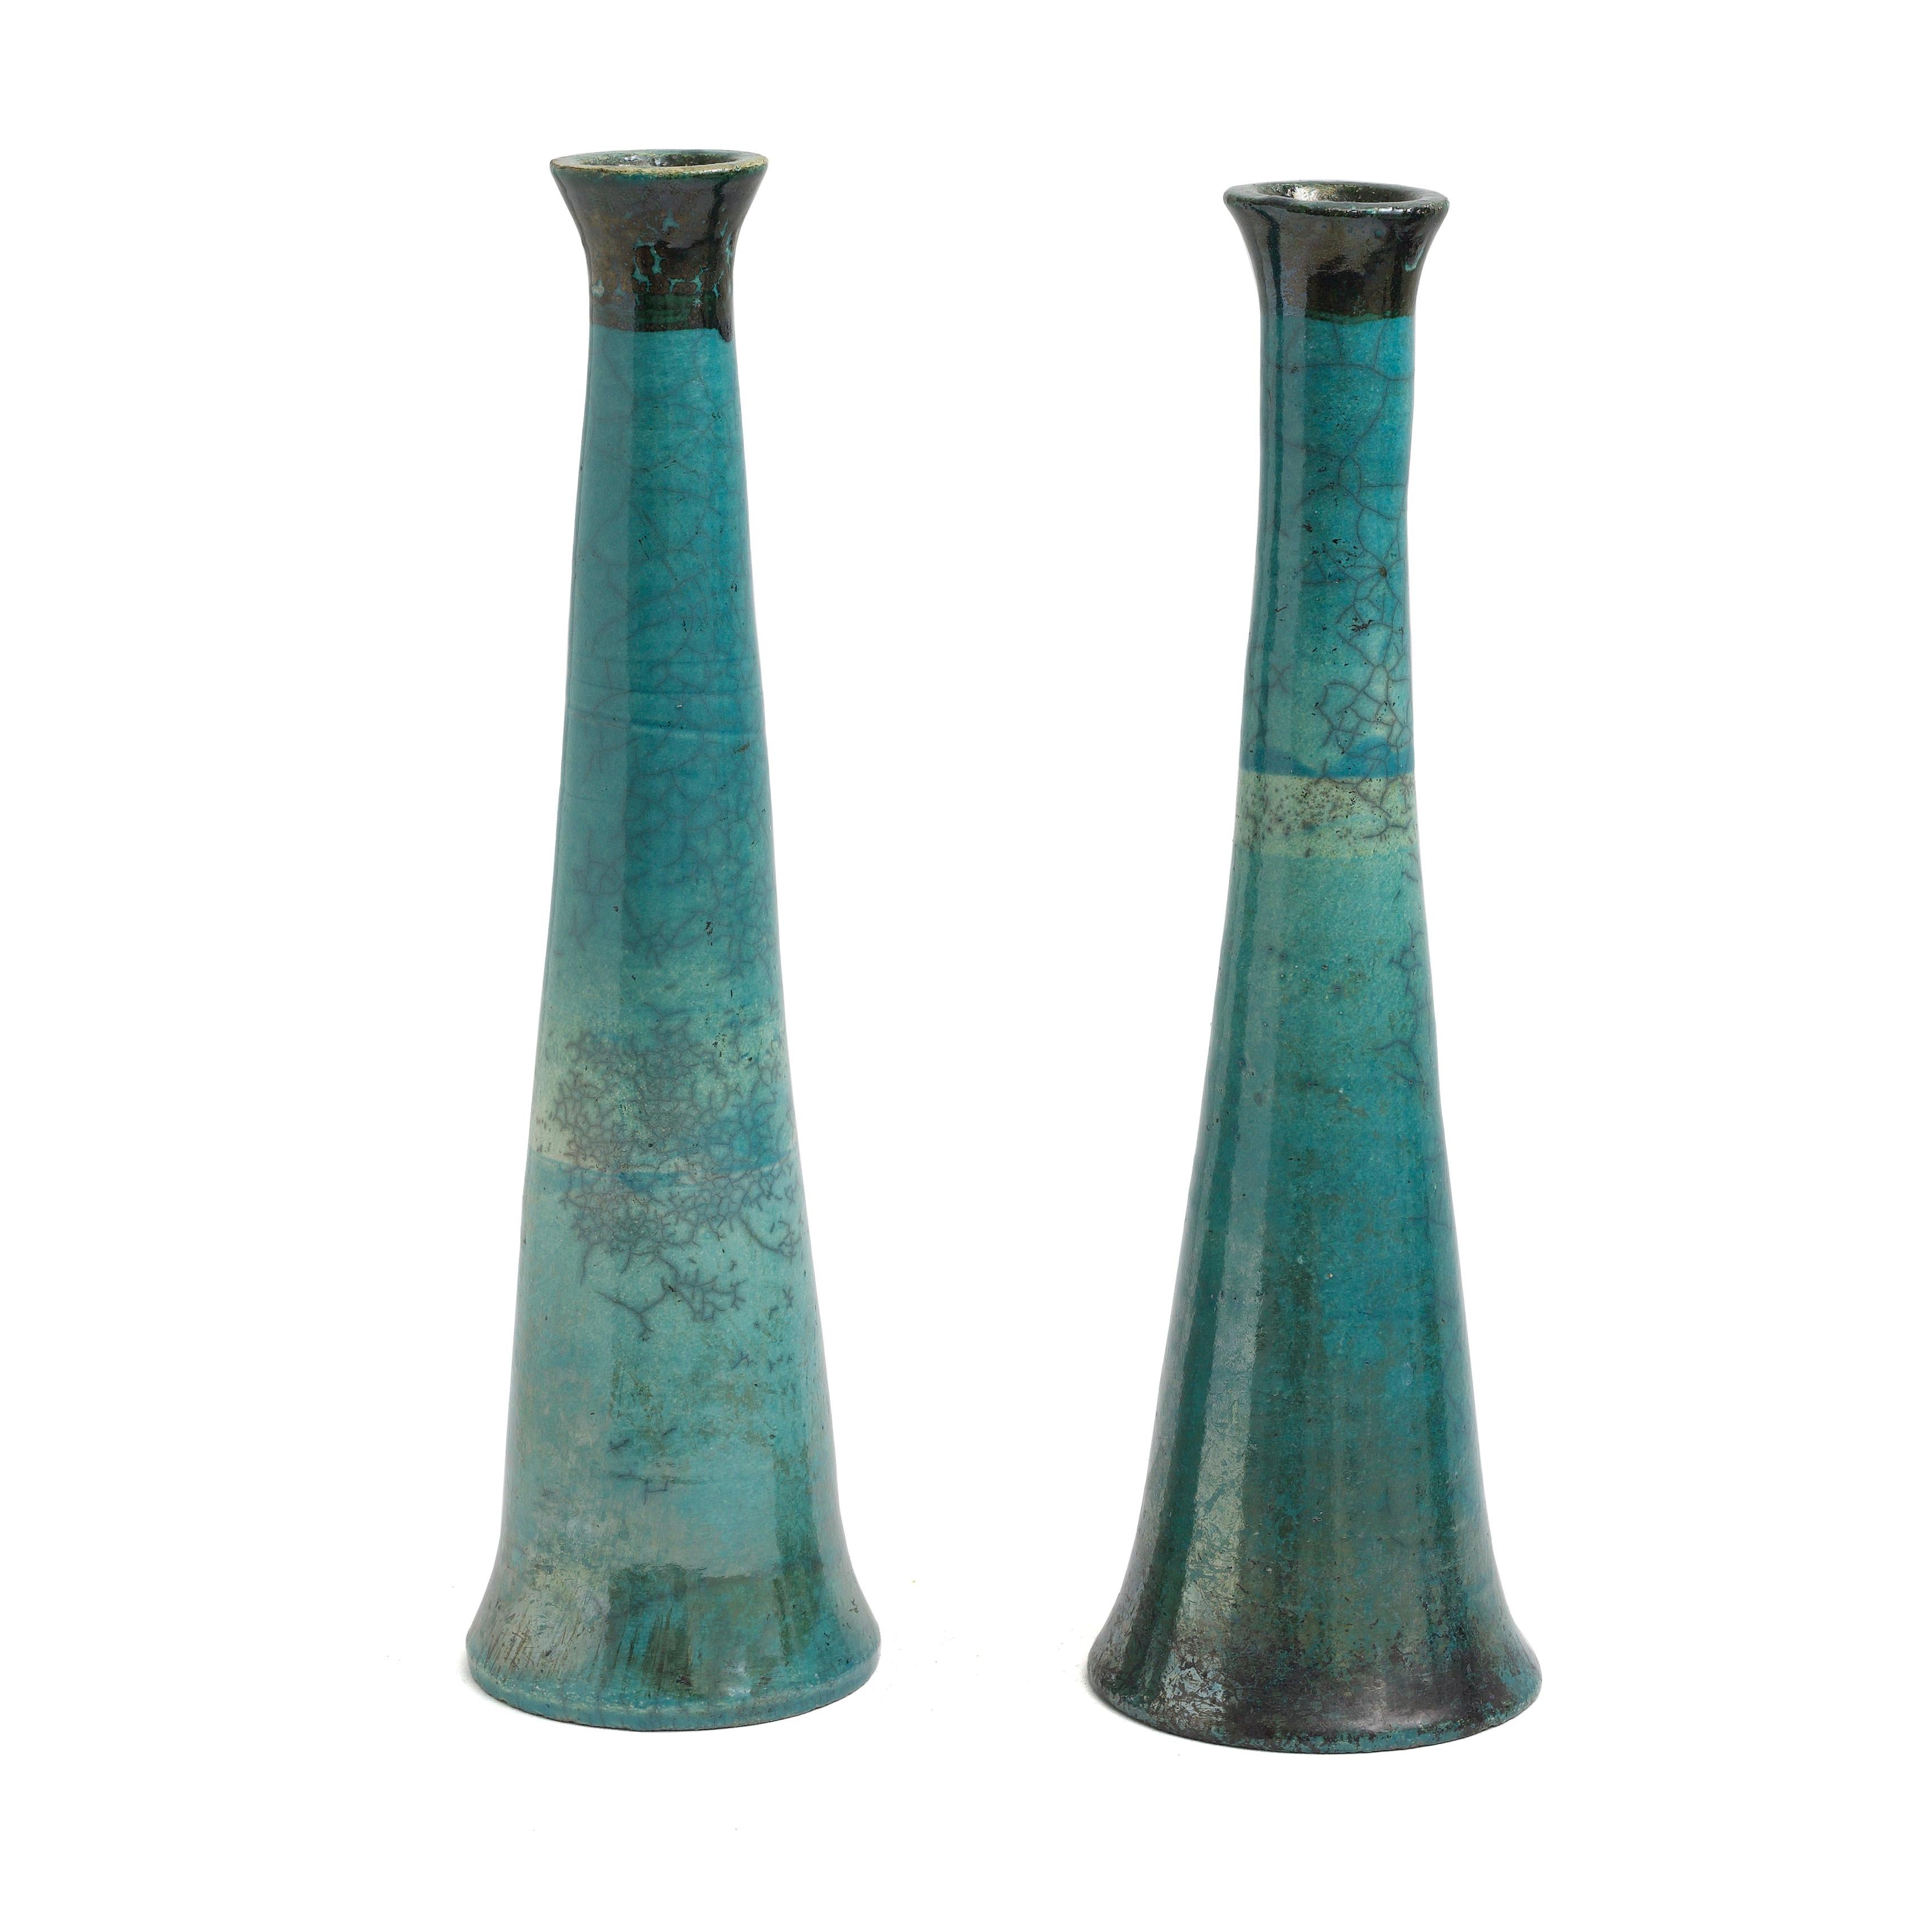 Tamu candle holders

A metallic effect cover these two tall candle holders so masterfully crafted that these pieces have a mirror effect along their entire bodies. Different shades of green and turquoise contained by a shiny black top and a